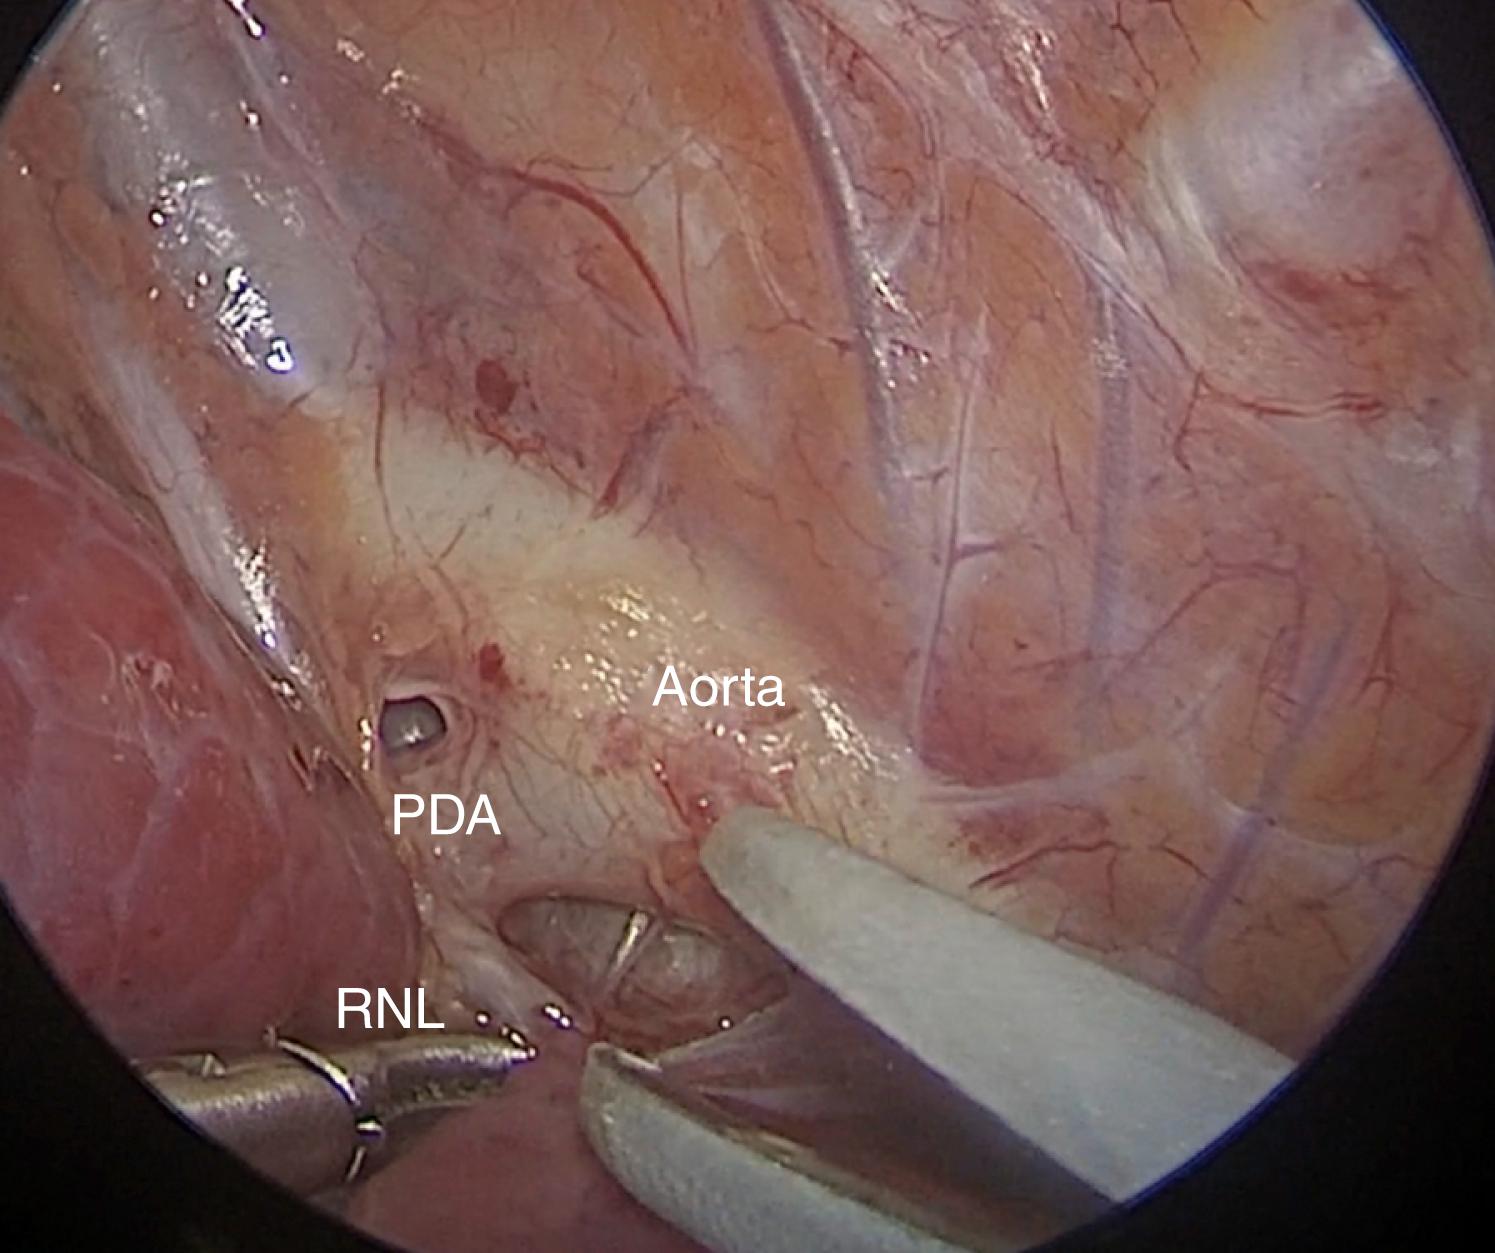 Fig. 39-4, This operative photograph shows that the patent ductus arteriosus (PDA) has been identified and mobilized after the pleural flap has been created to expose the PDA and recurrent laryngeal nerve (RLN).